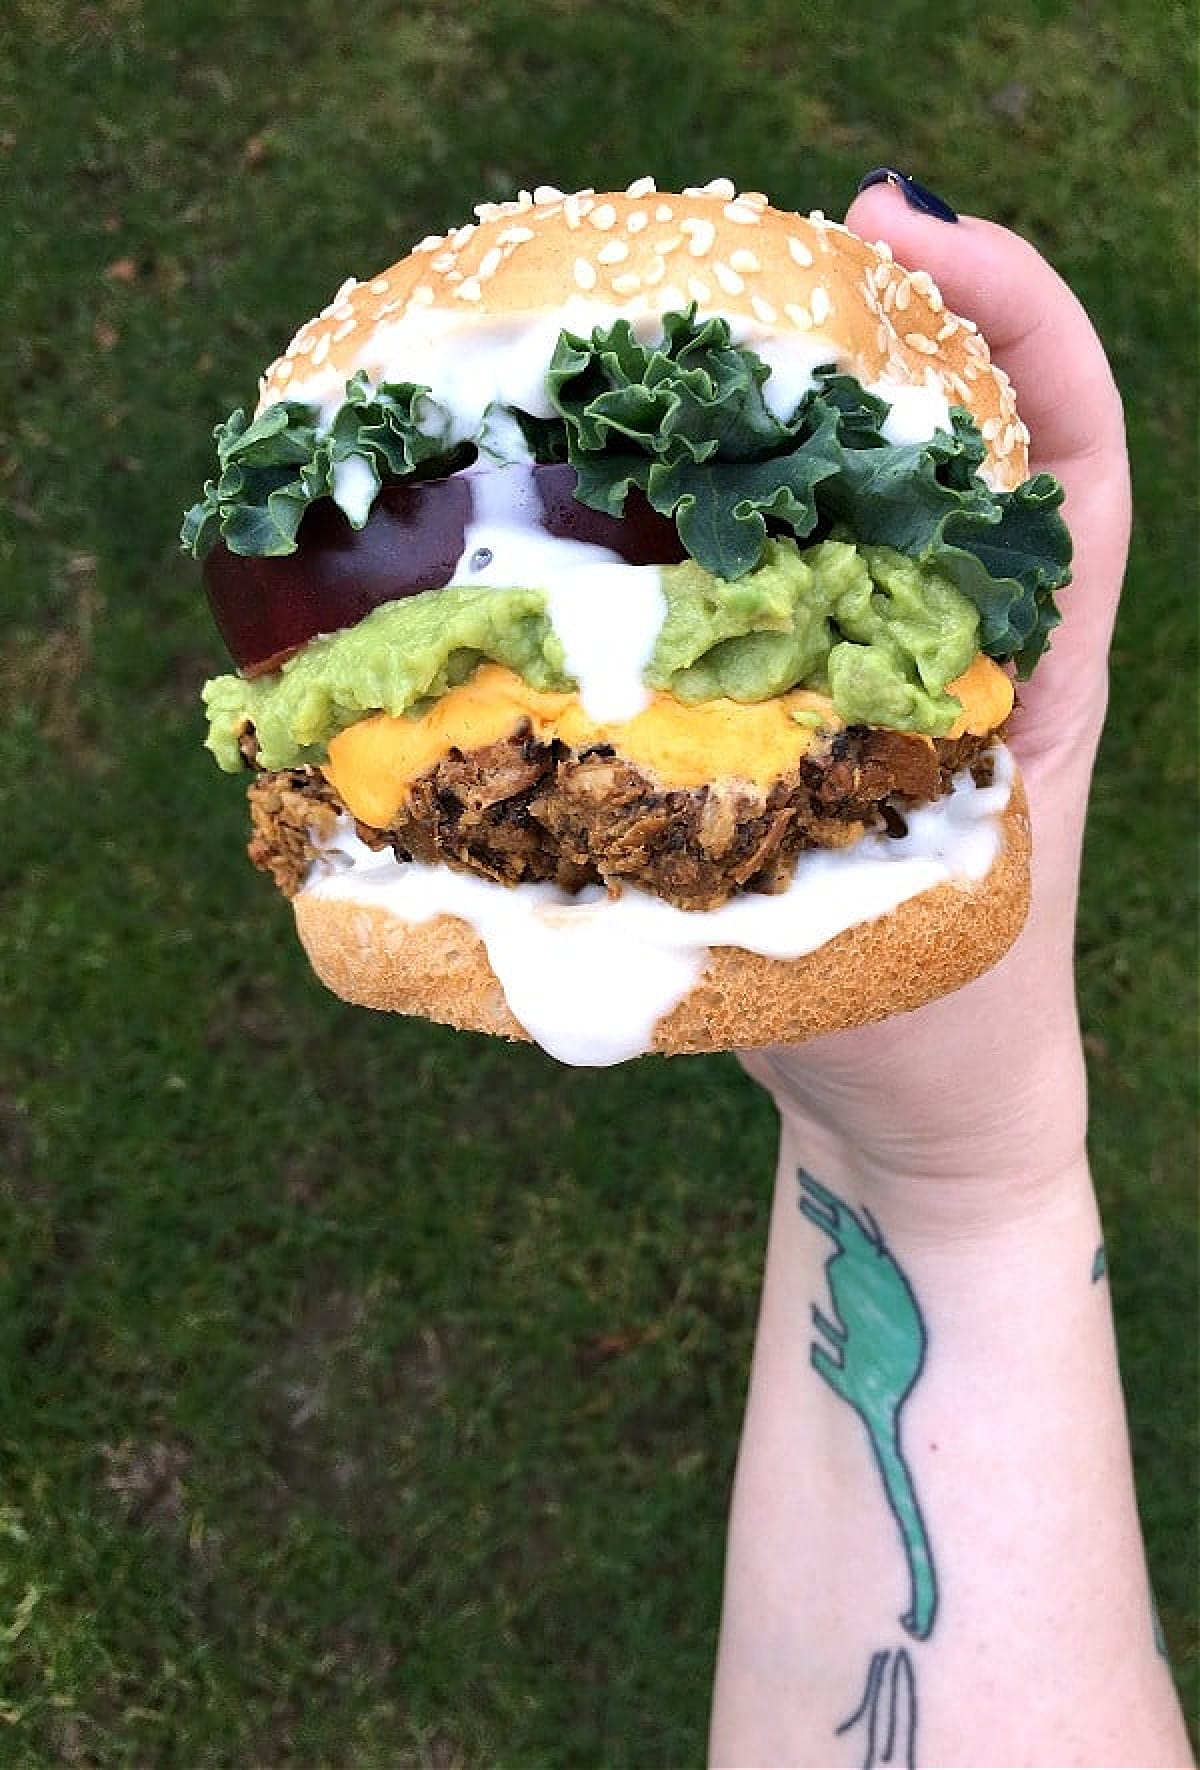 Mushroom burger held in hand, mayo dripping down side. Colorful toppings include green curly lettuce, deep red thick tomato slice, light green mashed avocado, bright yellow vegan cheese sauce, bright white vegan mayonnaise.